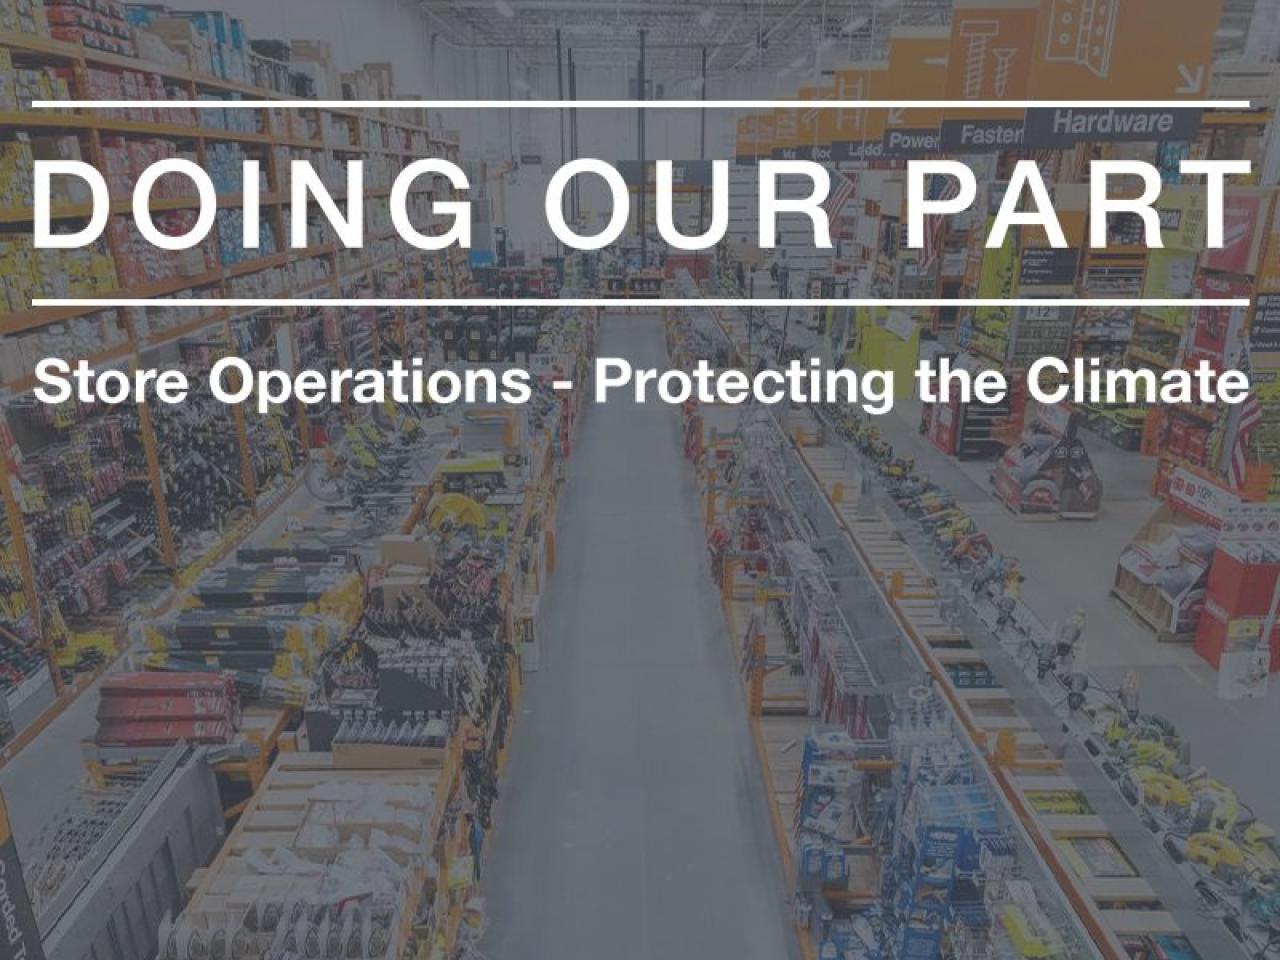 Doing Our Part: Store Operations, Protecting the Climate.